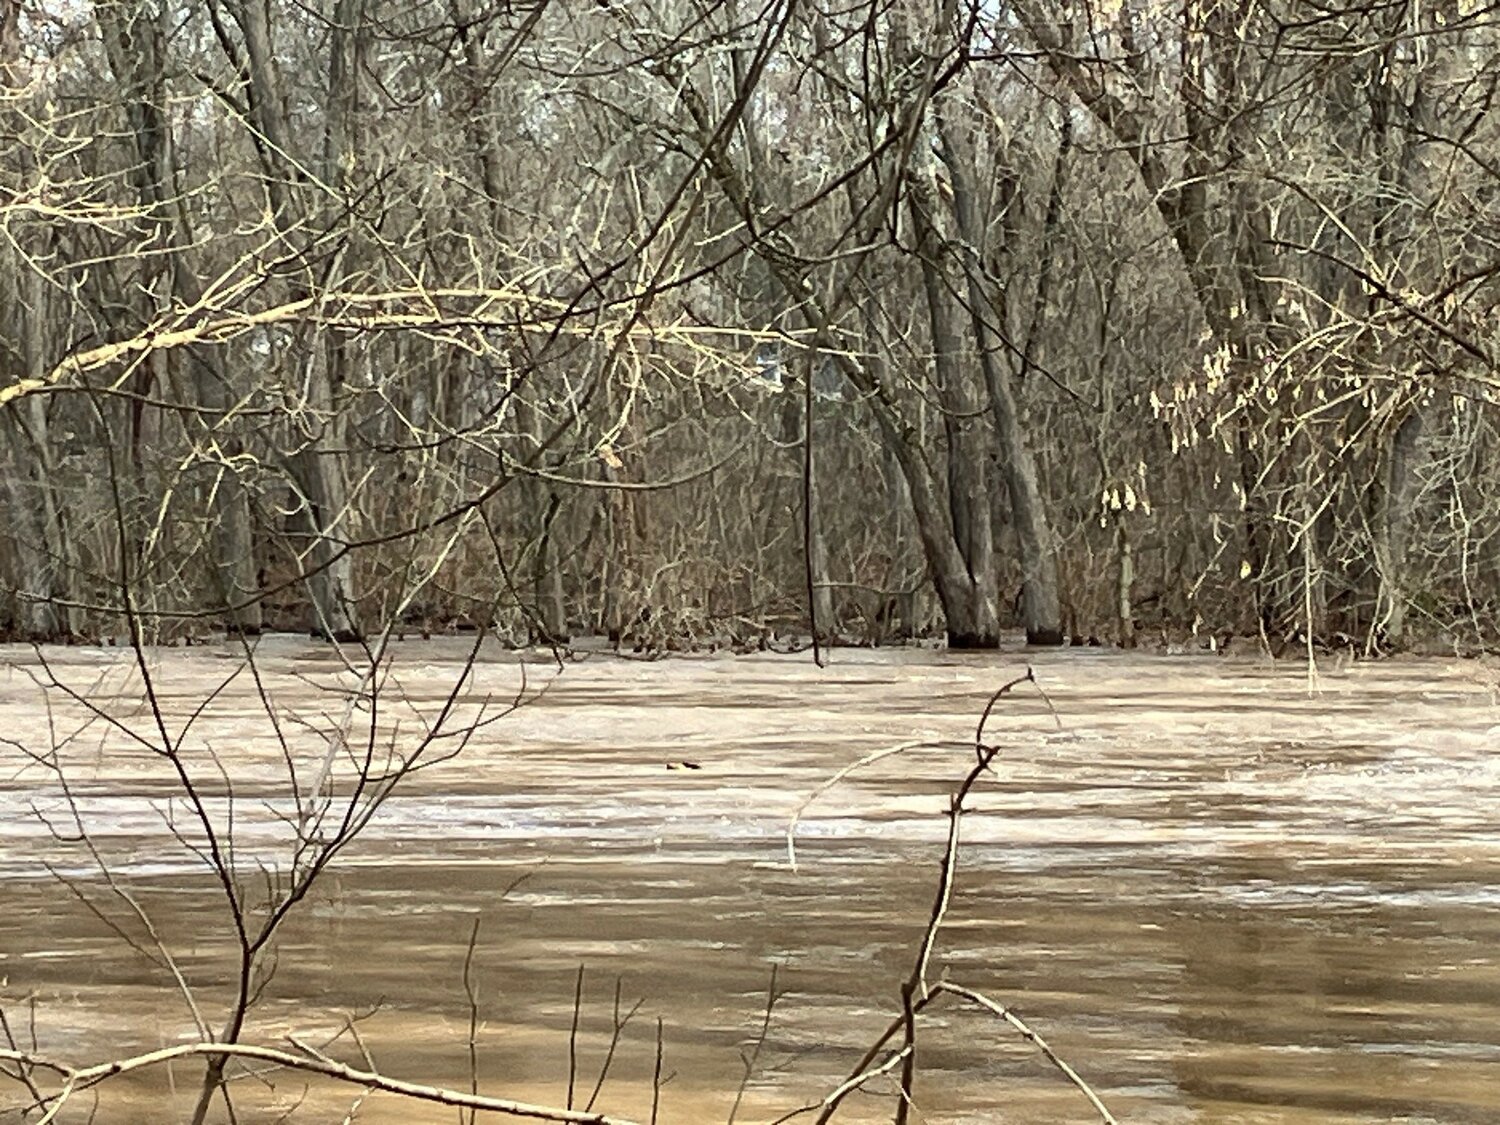 The swift-moving Neshaminy Creek leaped its banks and submerged the lower portions of trees and properties on both the Middletown and Lower Southampton sides of the creek on Wednesday.